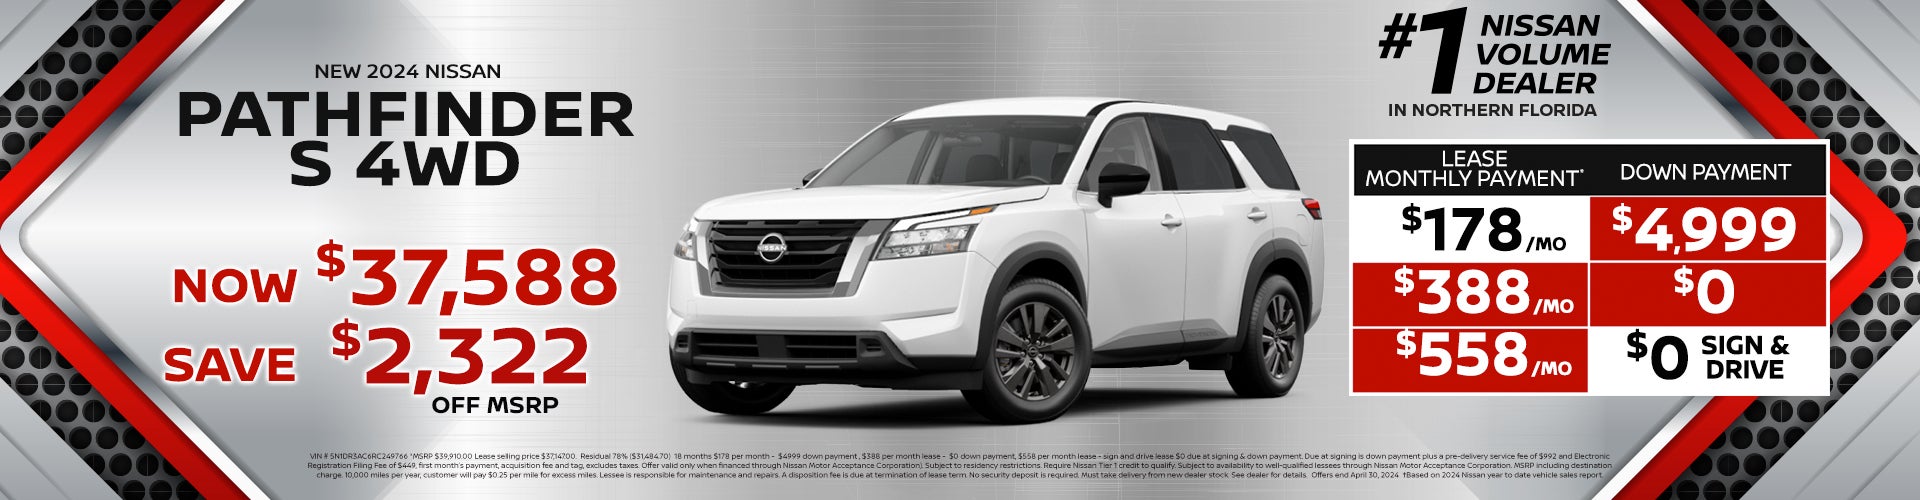 2024 Pathfinder Lease for as low as $178 per month